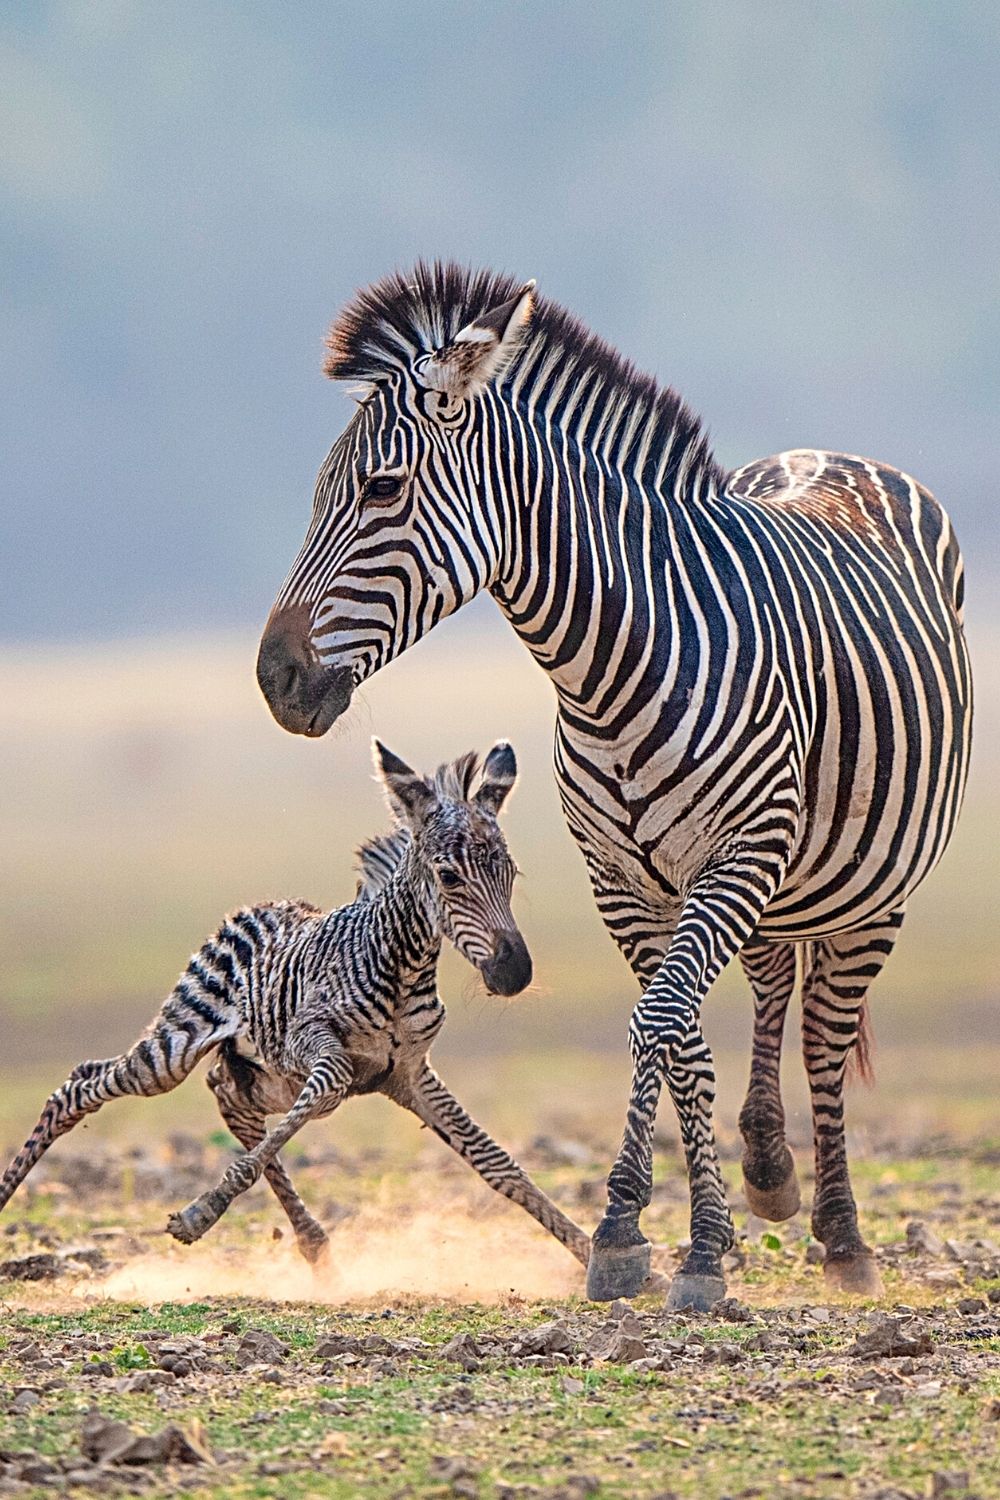 If the Alpha male isn't the father of the zebra foul, it will kill the newborn as soon as he notices it stand